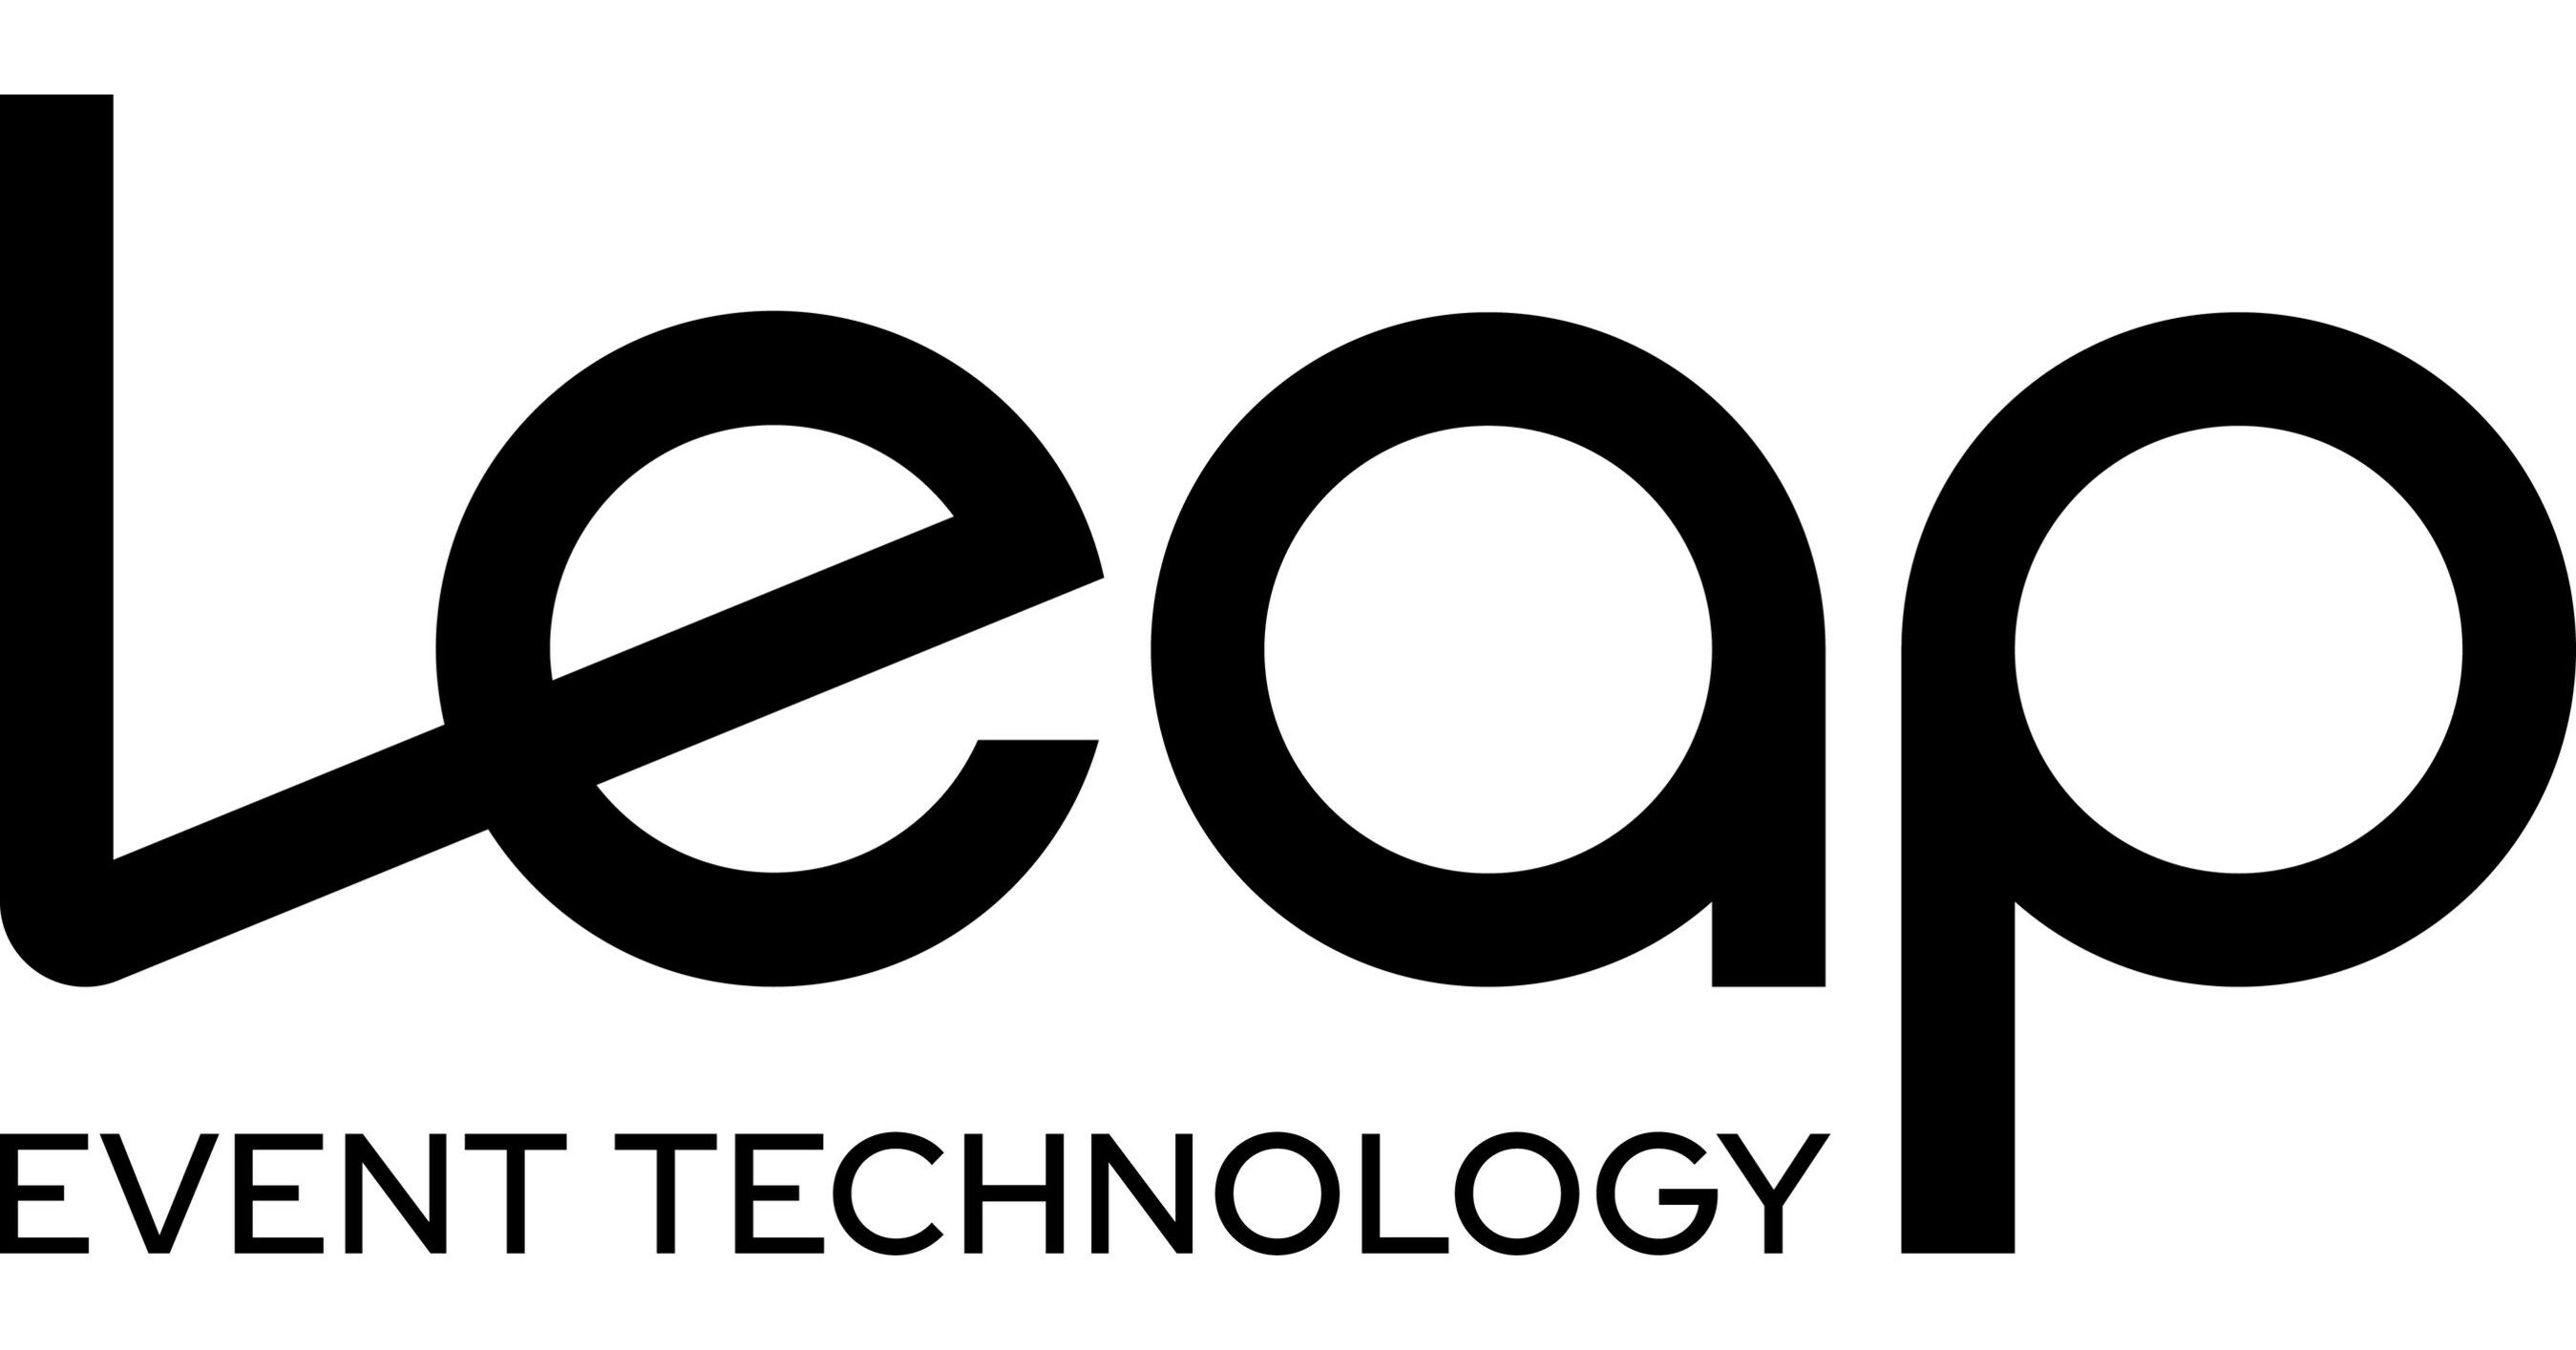 LEAP EVENT TECHNOLOGY CELEBRATES 10 YEARS IN PARTNERSHIP WITH REEDPOP